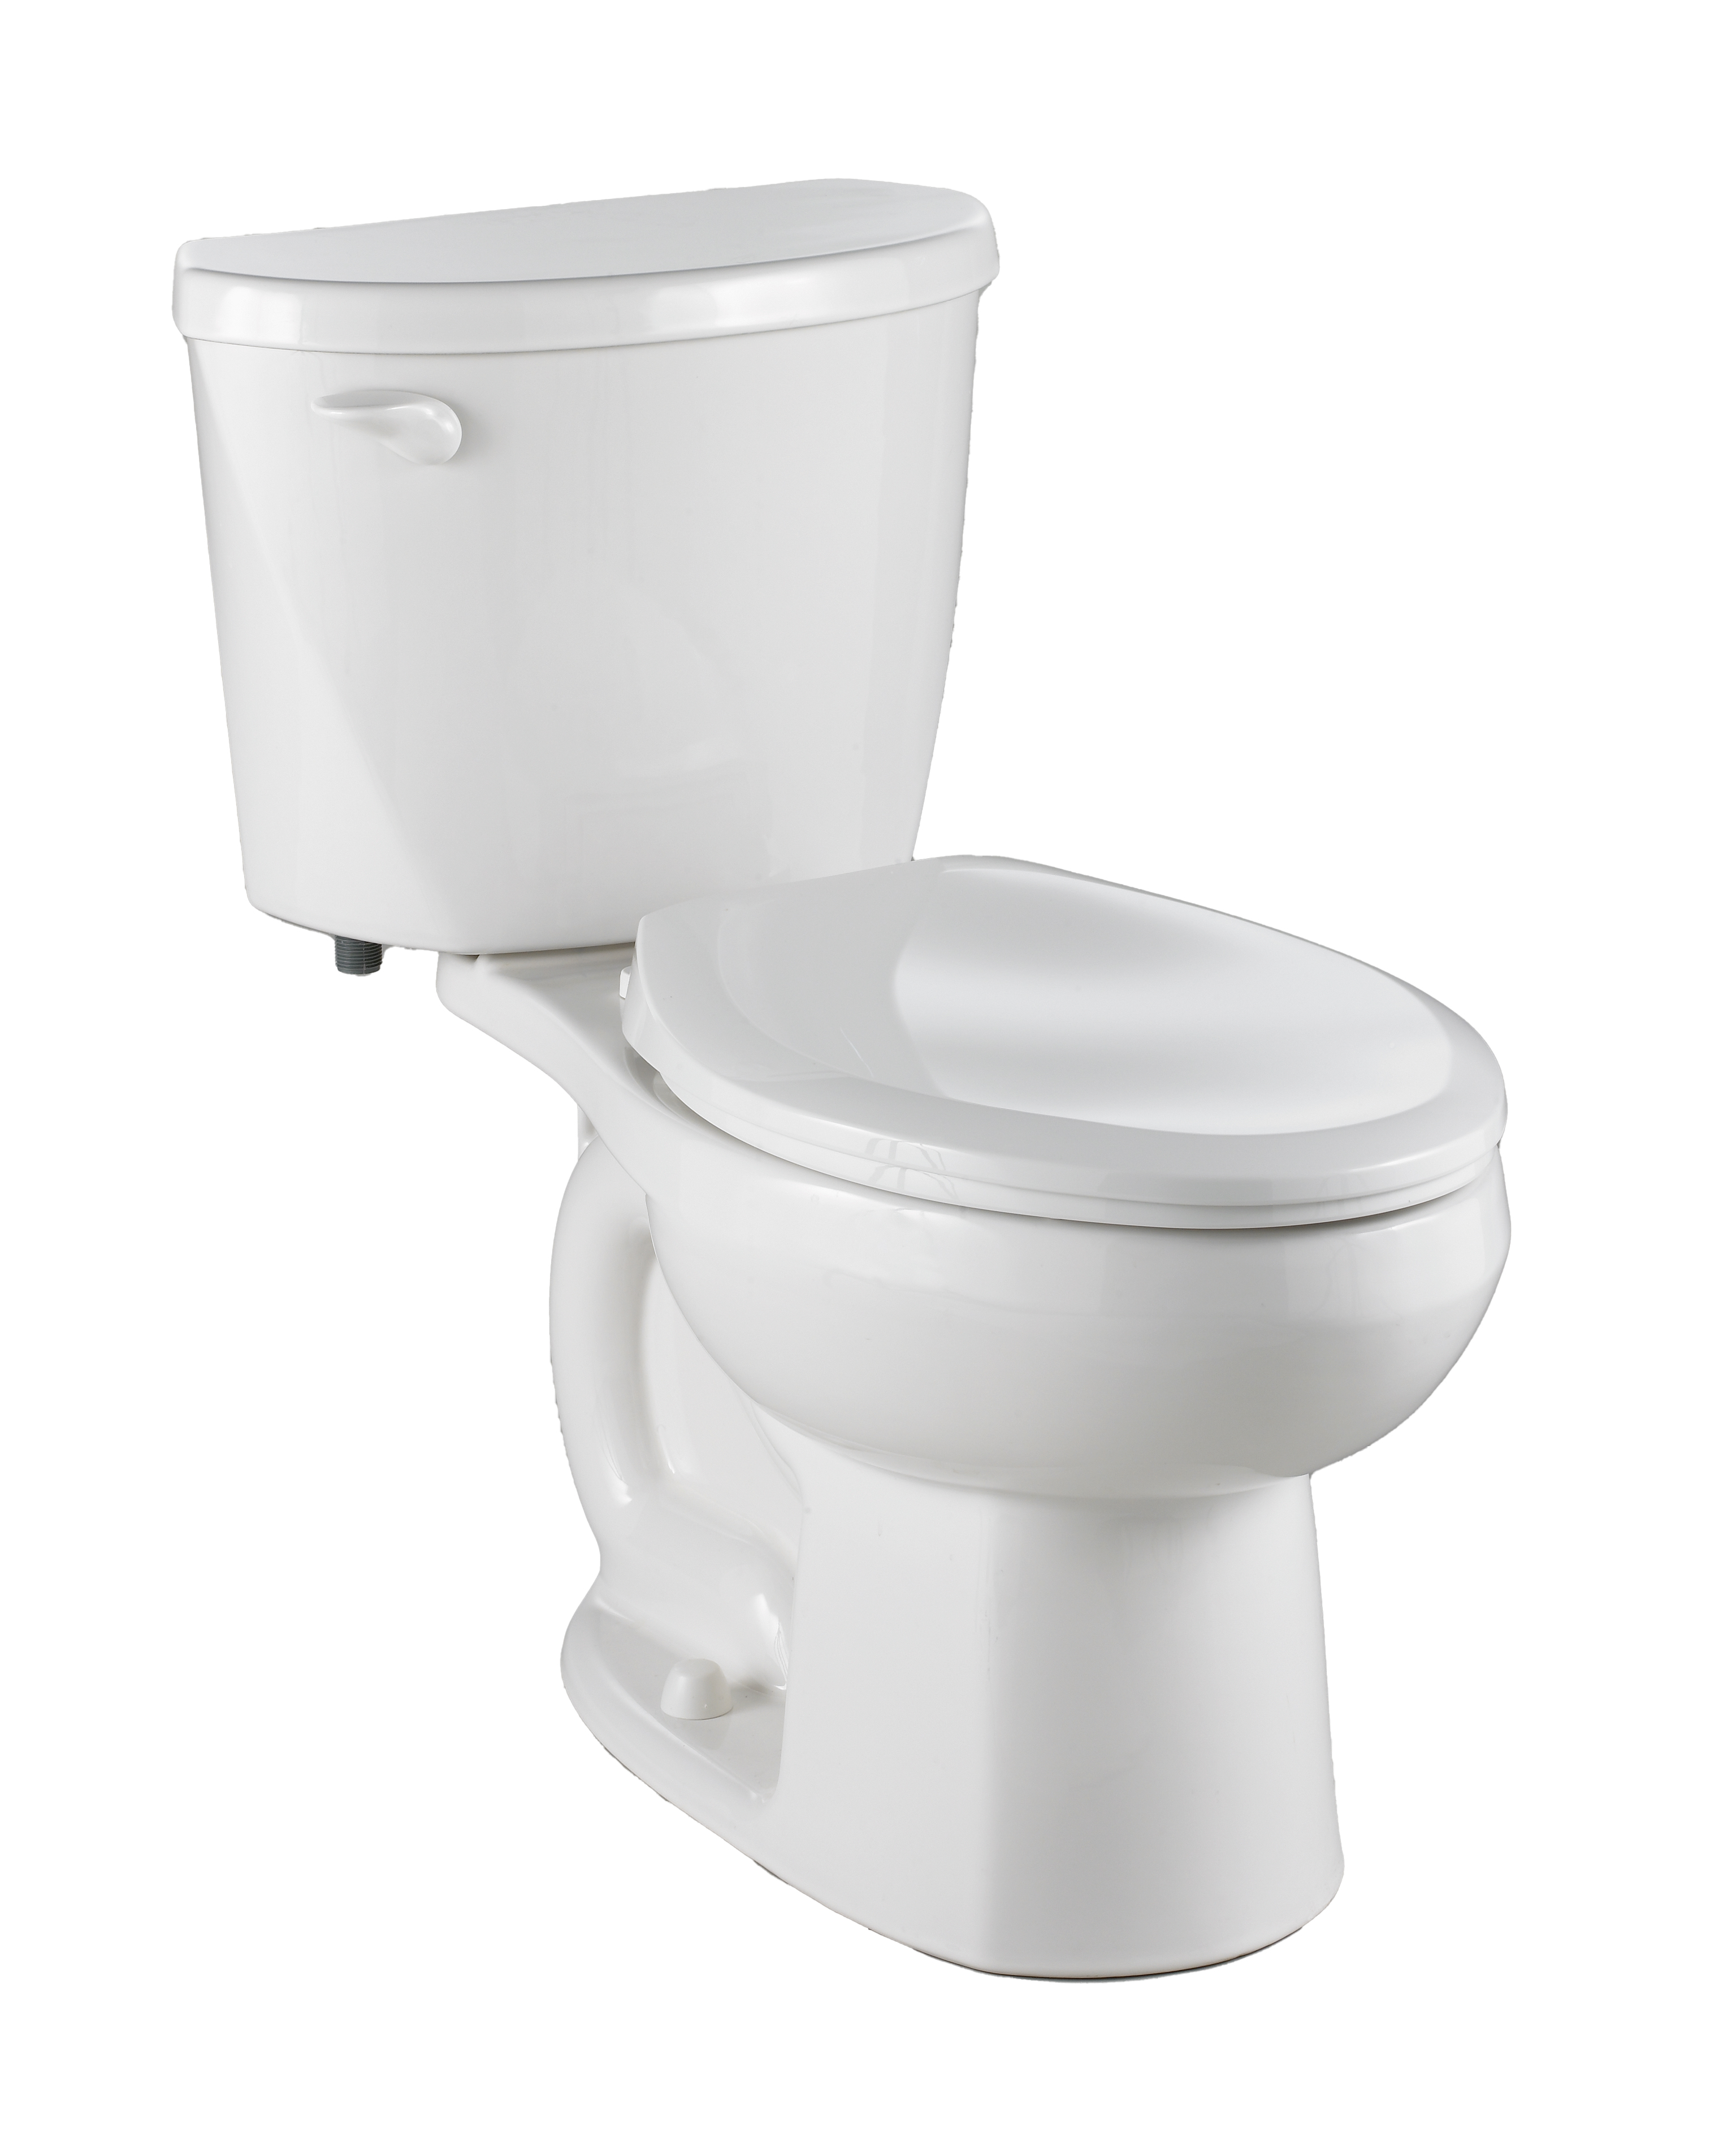 Evolution 2 Two-Piece 1.6 gpf/6.0 Lpf Chair Height Elongated Toilet Less Seat